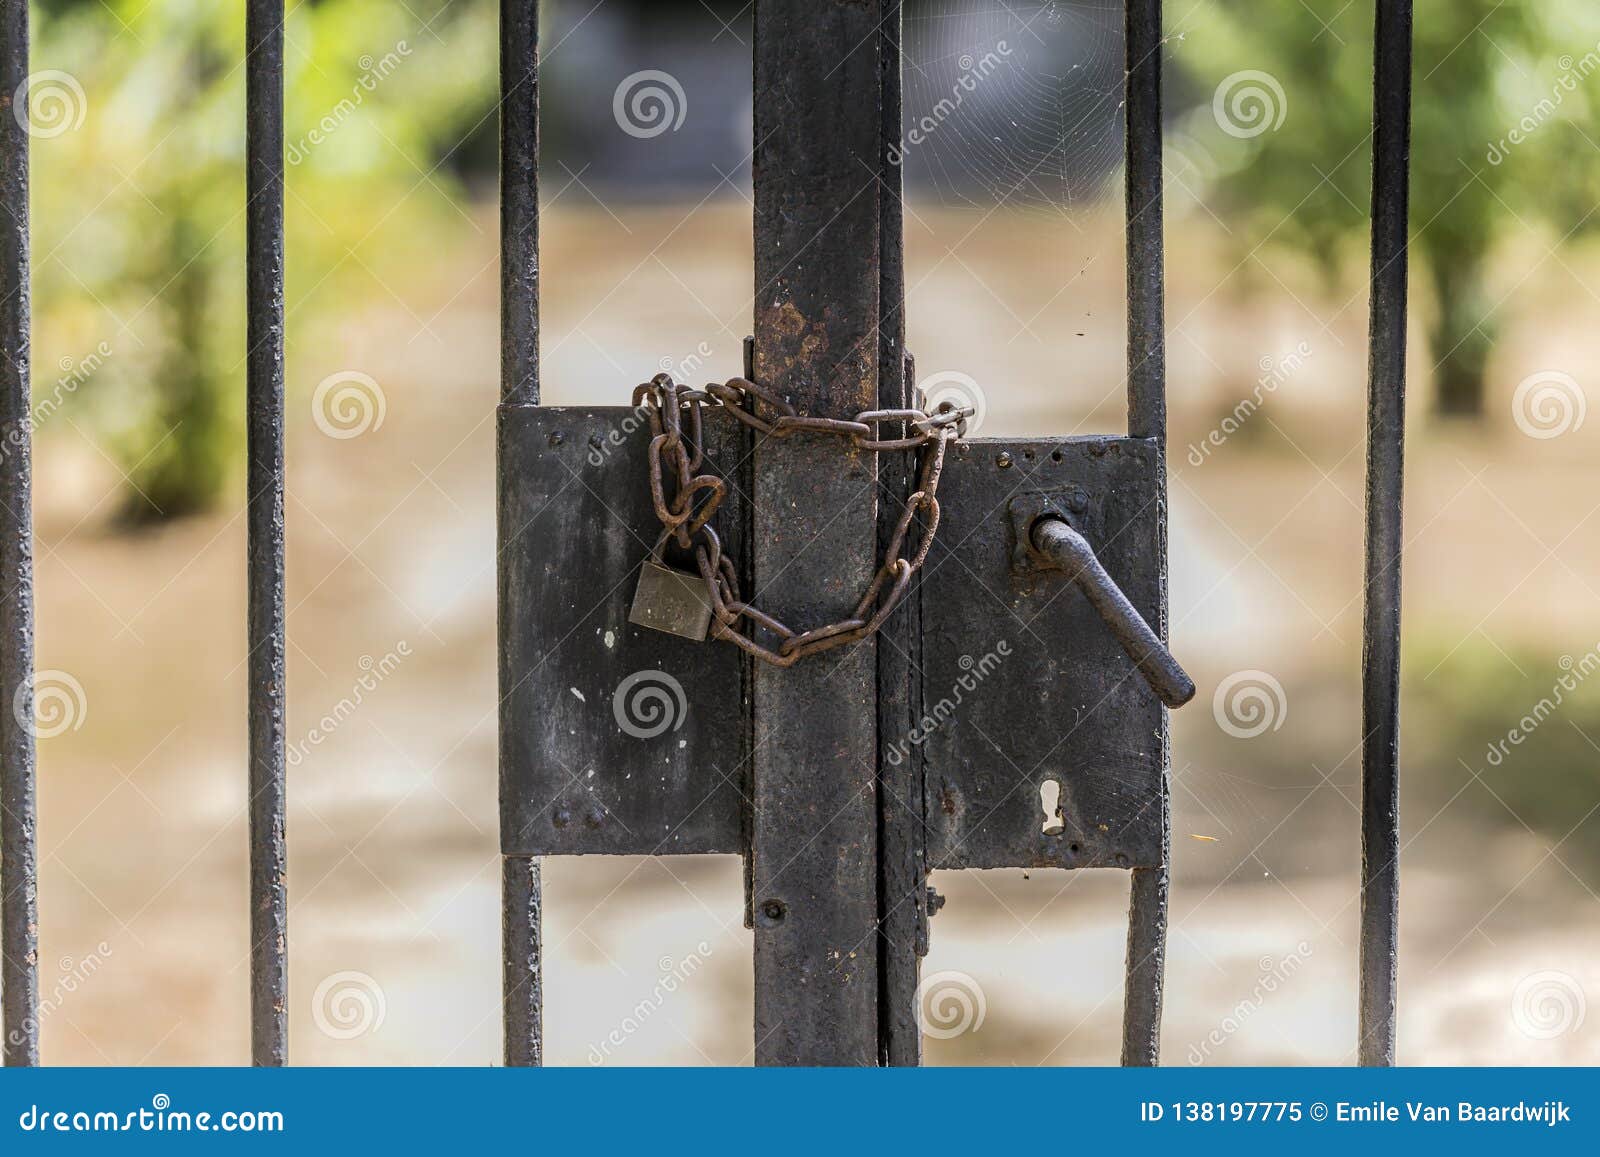 Close Up of a Lock with a Chain of a Metal Gate Stock Image - Image of ...